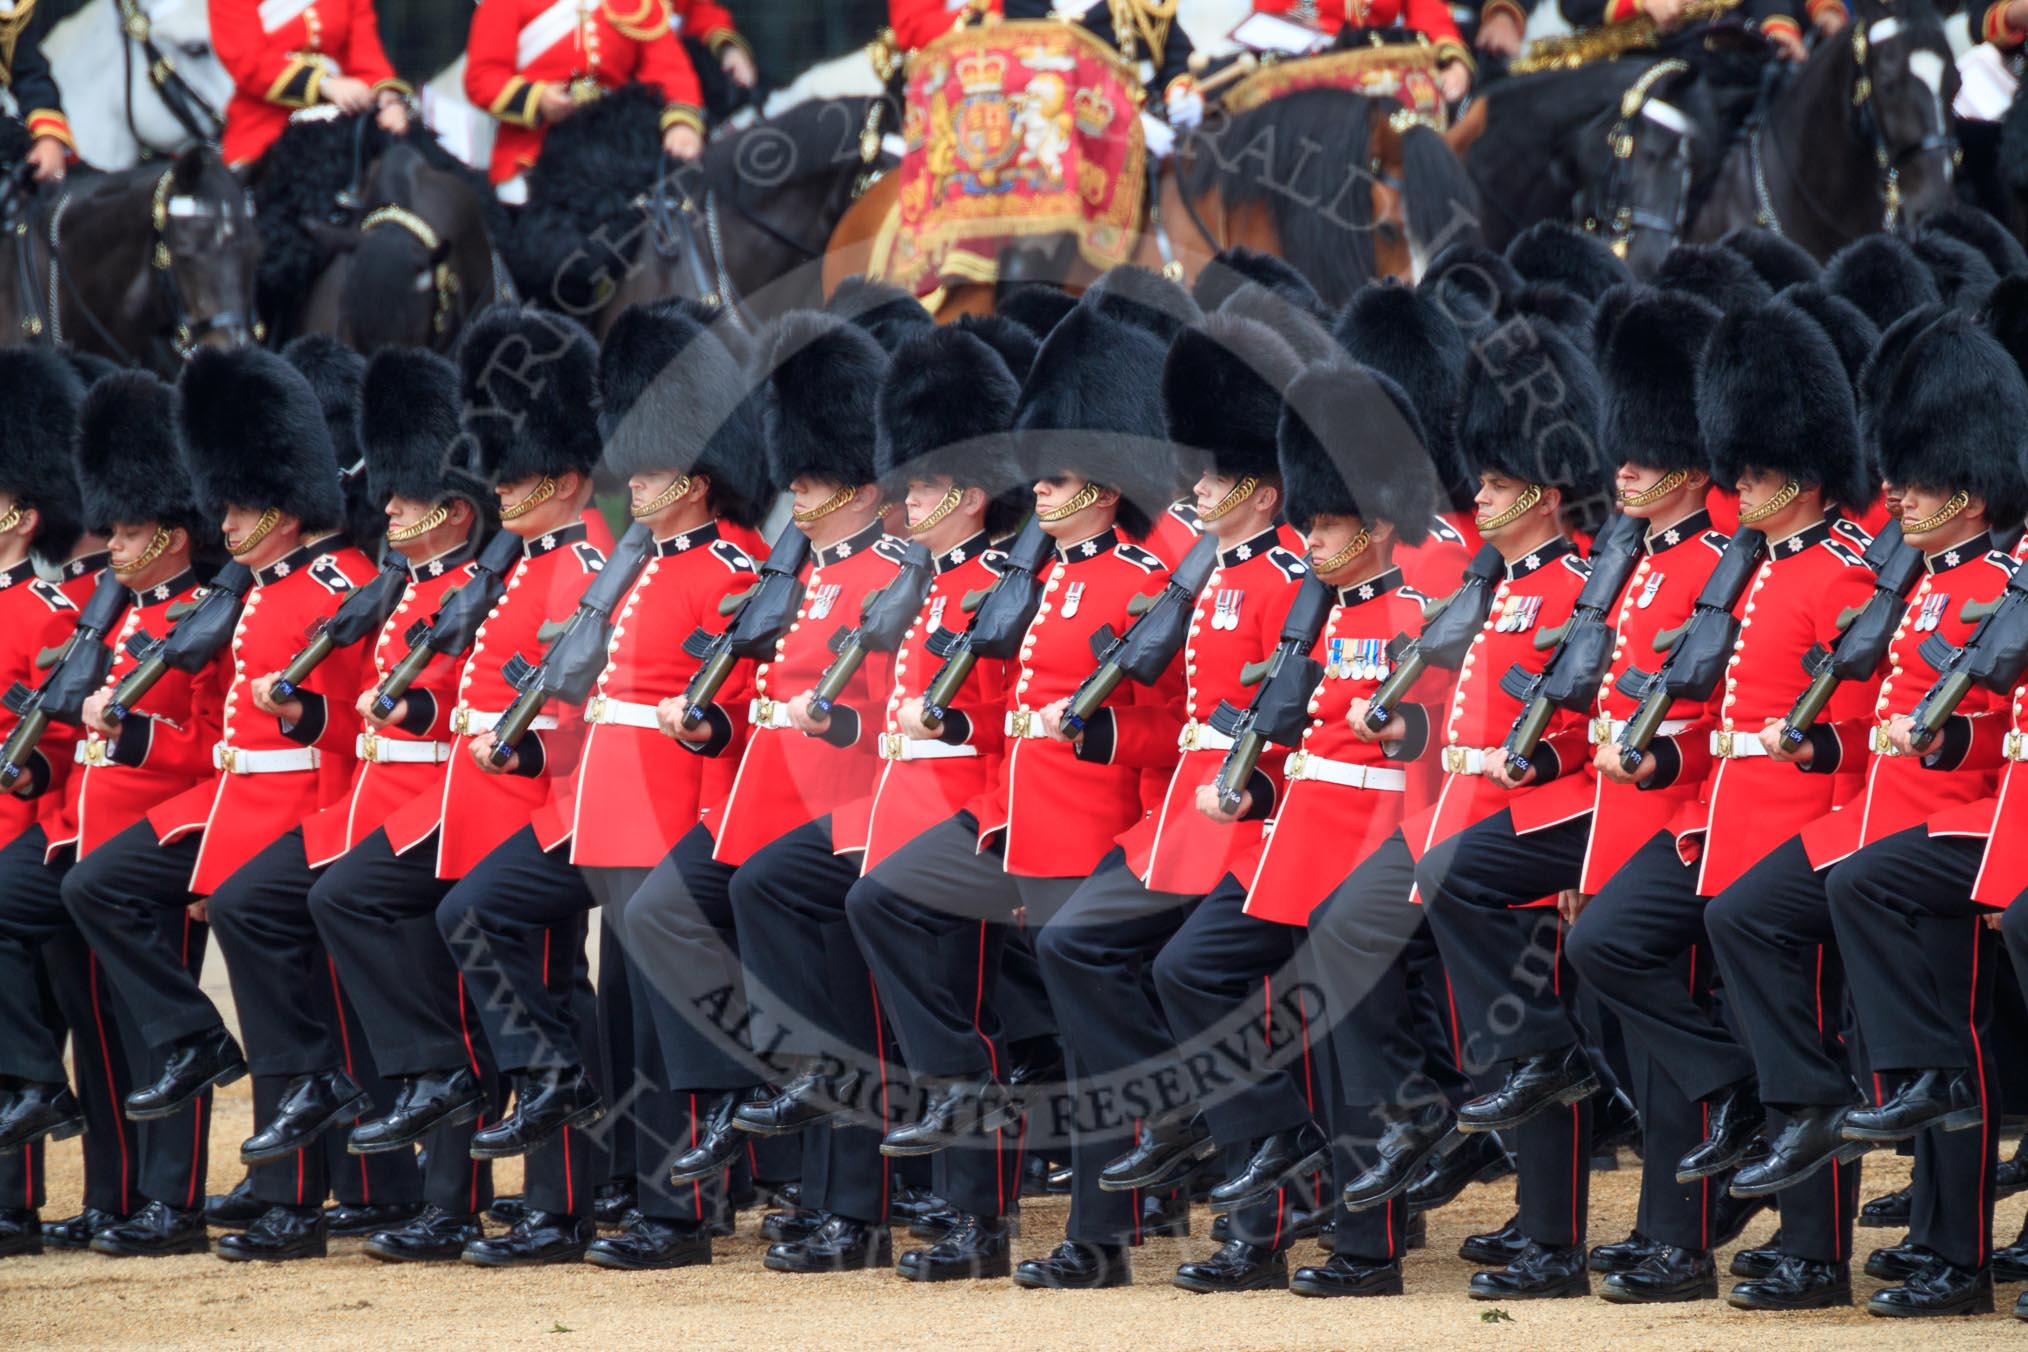 during The Colonel's Review {iptcyear4} (final rehearsal for Trooping the Colour, The Queen's Birthday Parade)  at Horse Guards Parade, Westminster, London, 2 June 2018, 11:42.